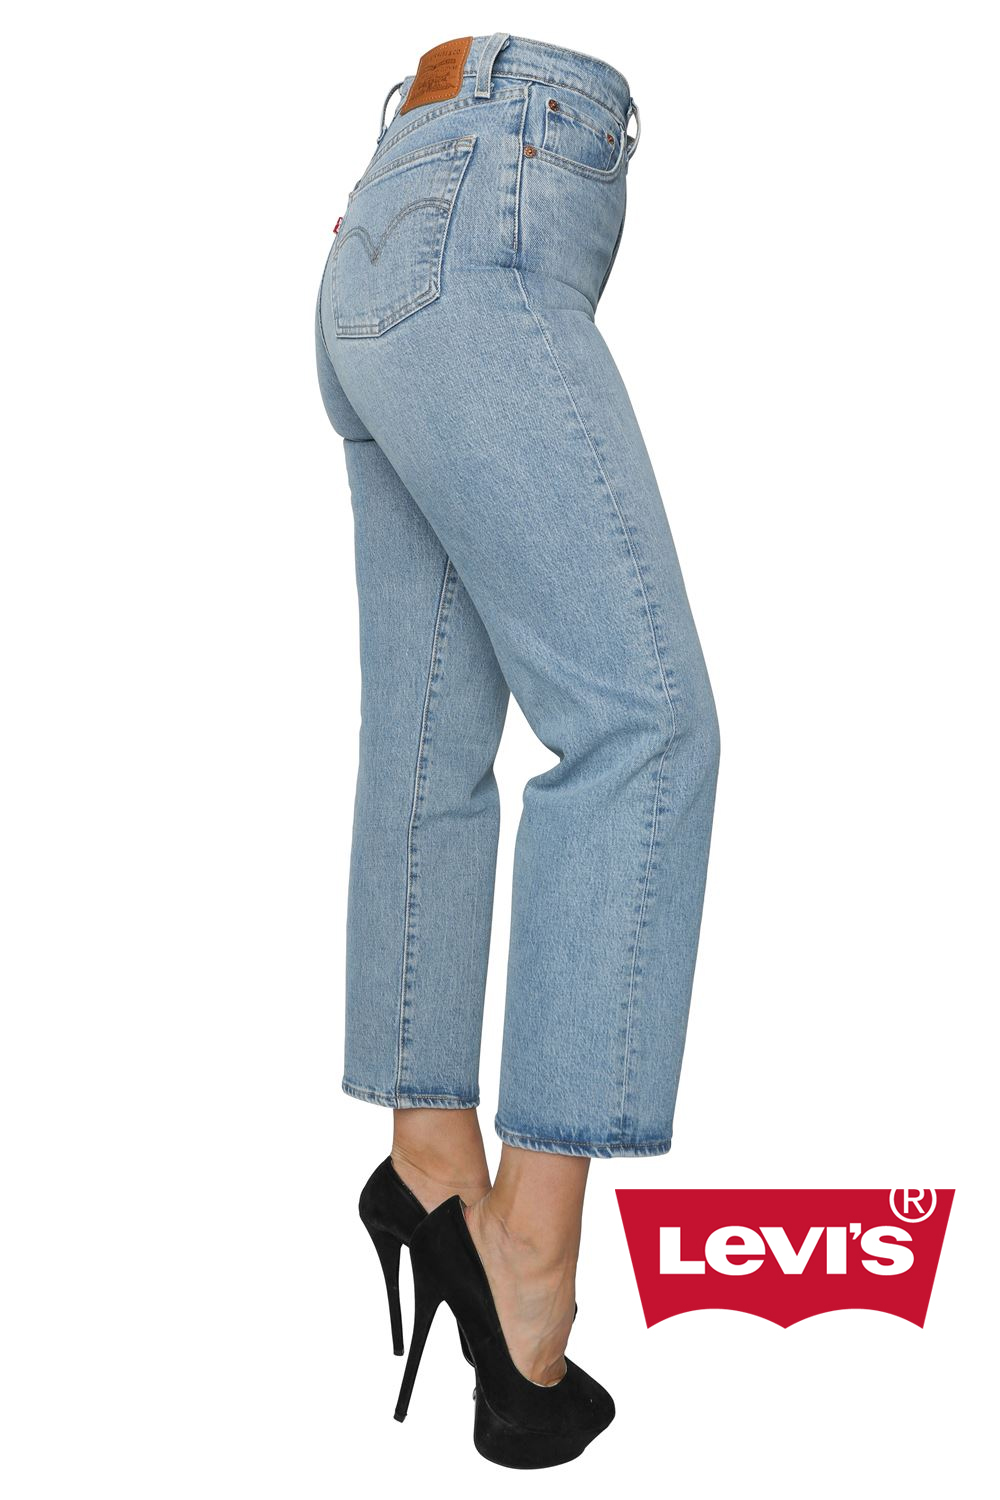 Ribcage Straight Ankle Levis jeans